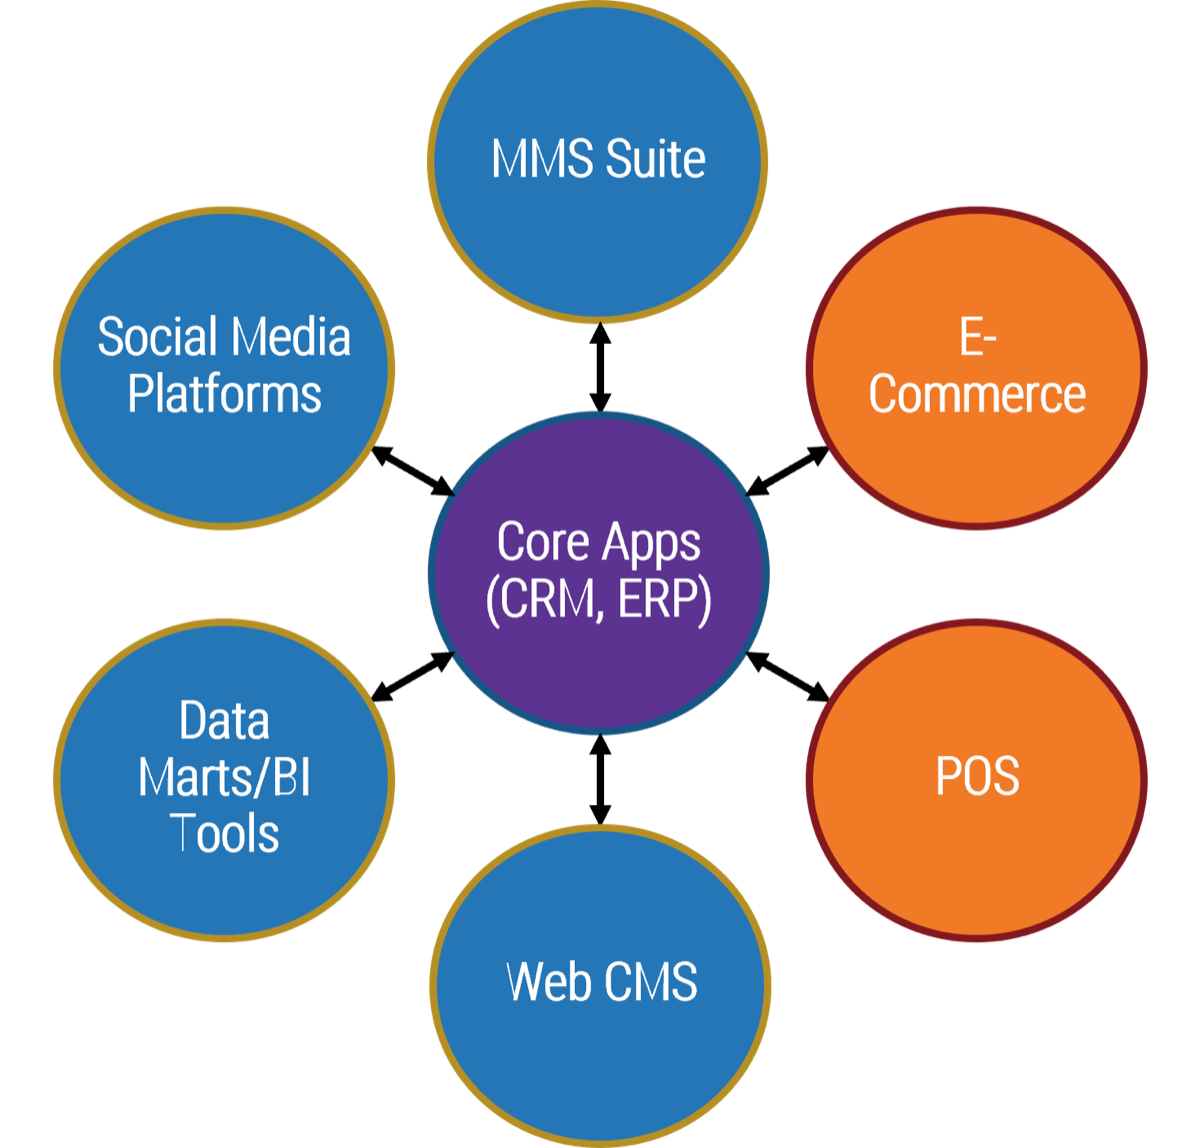 This is an example of a customer experience ecosystem.  Core Apps (CRM, ERP): MMS Suite; E-Commerce; POS; Web CMS; Data Marts/BI Tools; Social Media Platforms